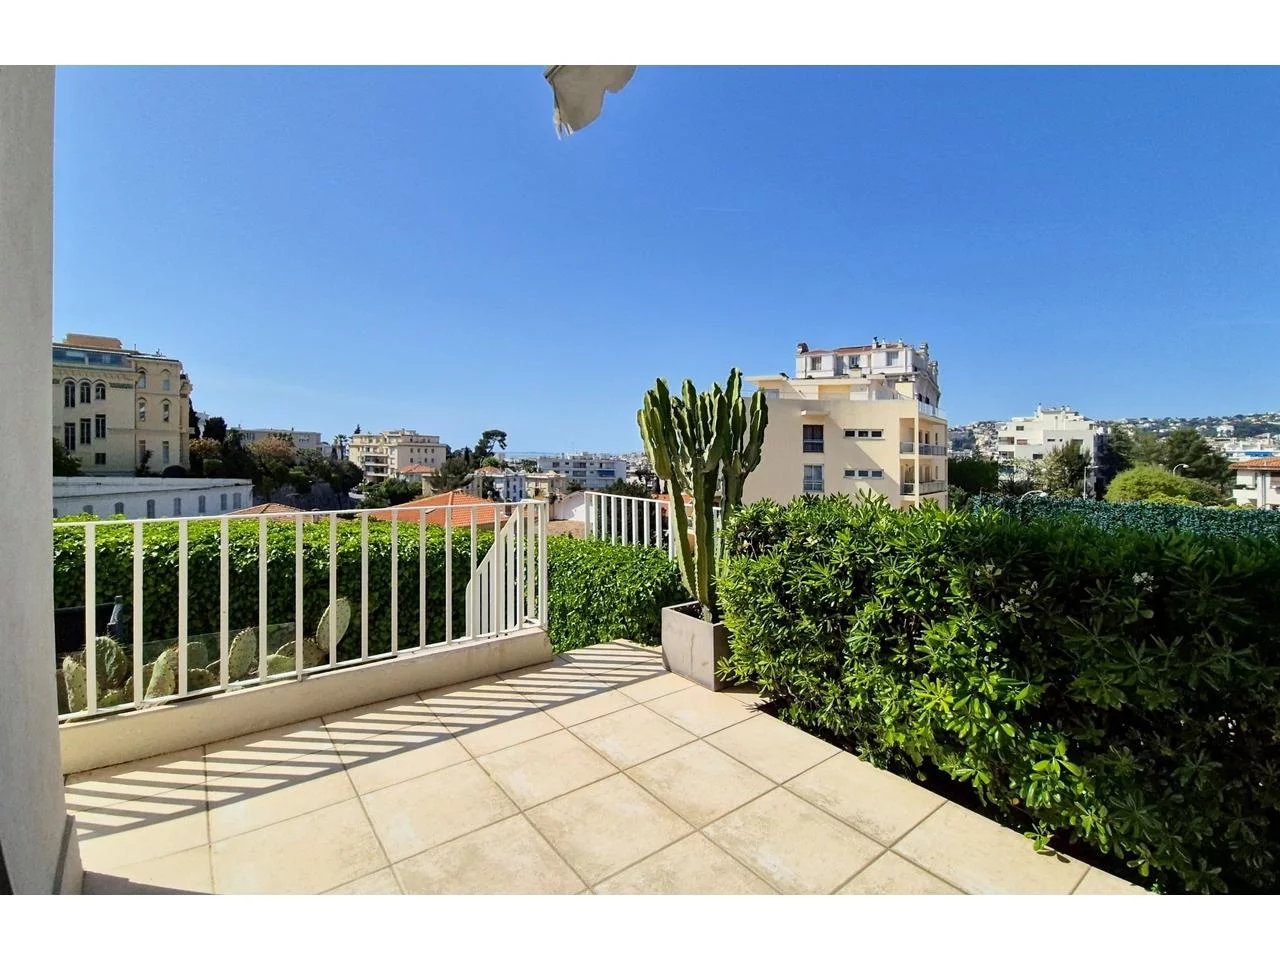 Appartement  3 Rooms 83.03m2  for sale   695 000 €